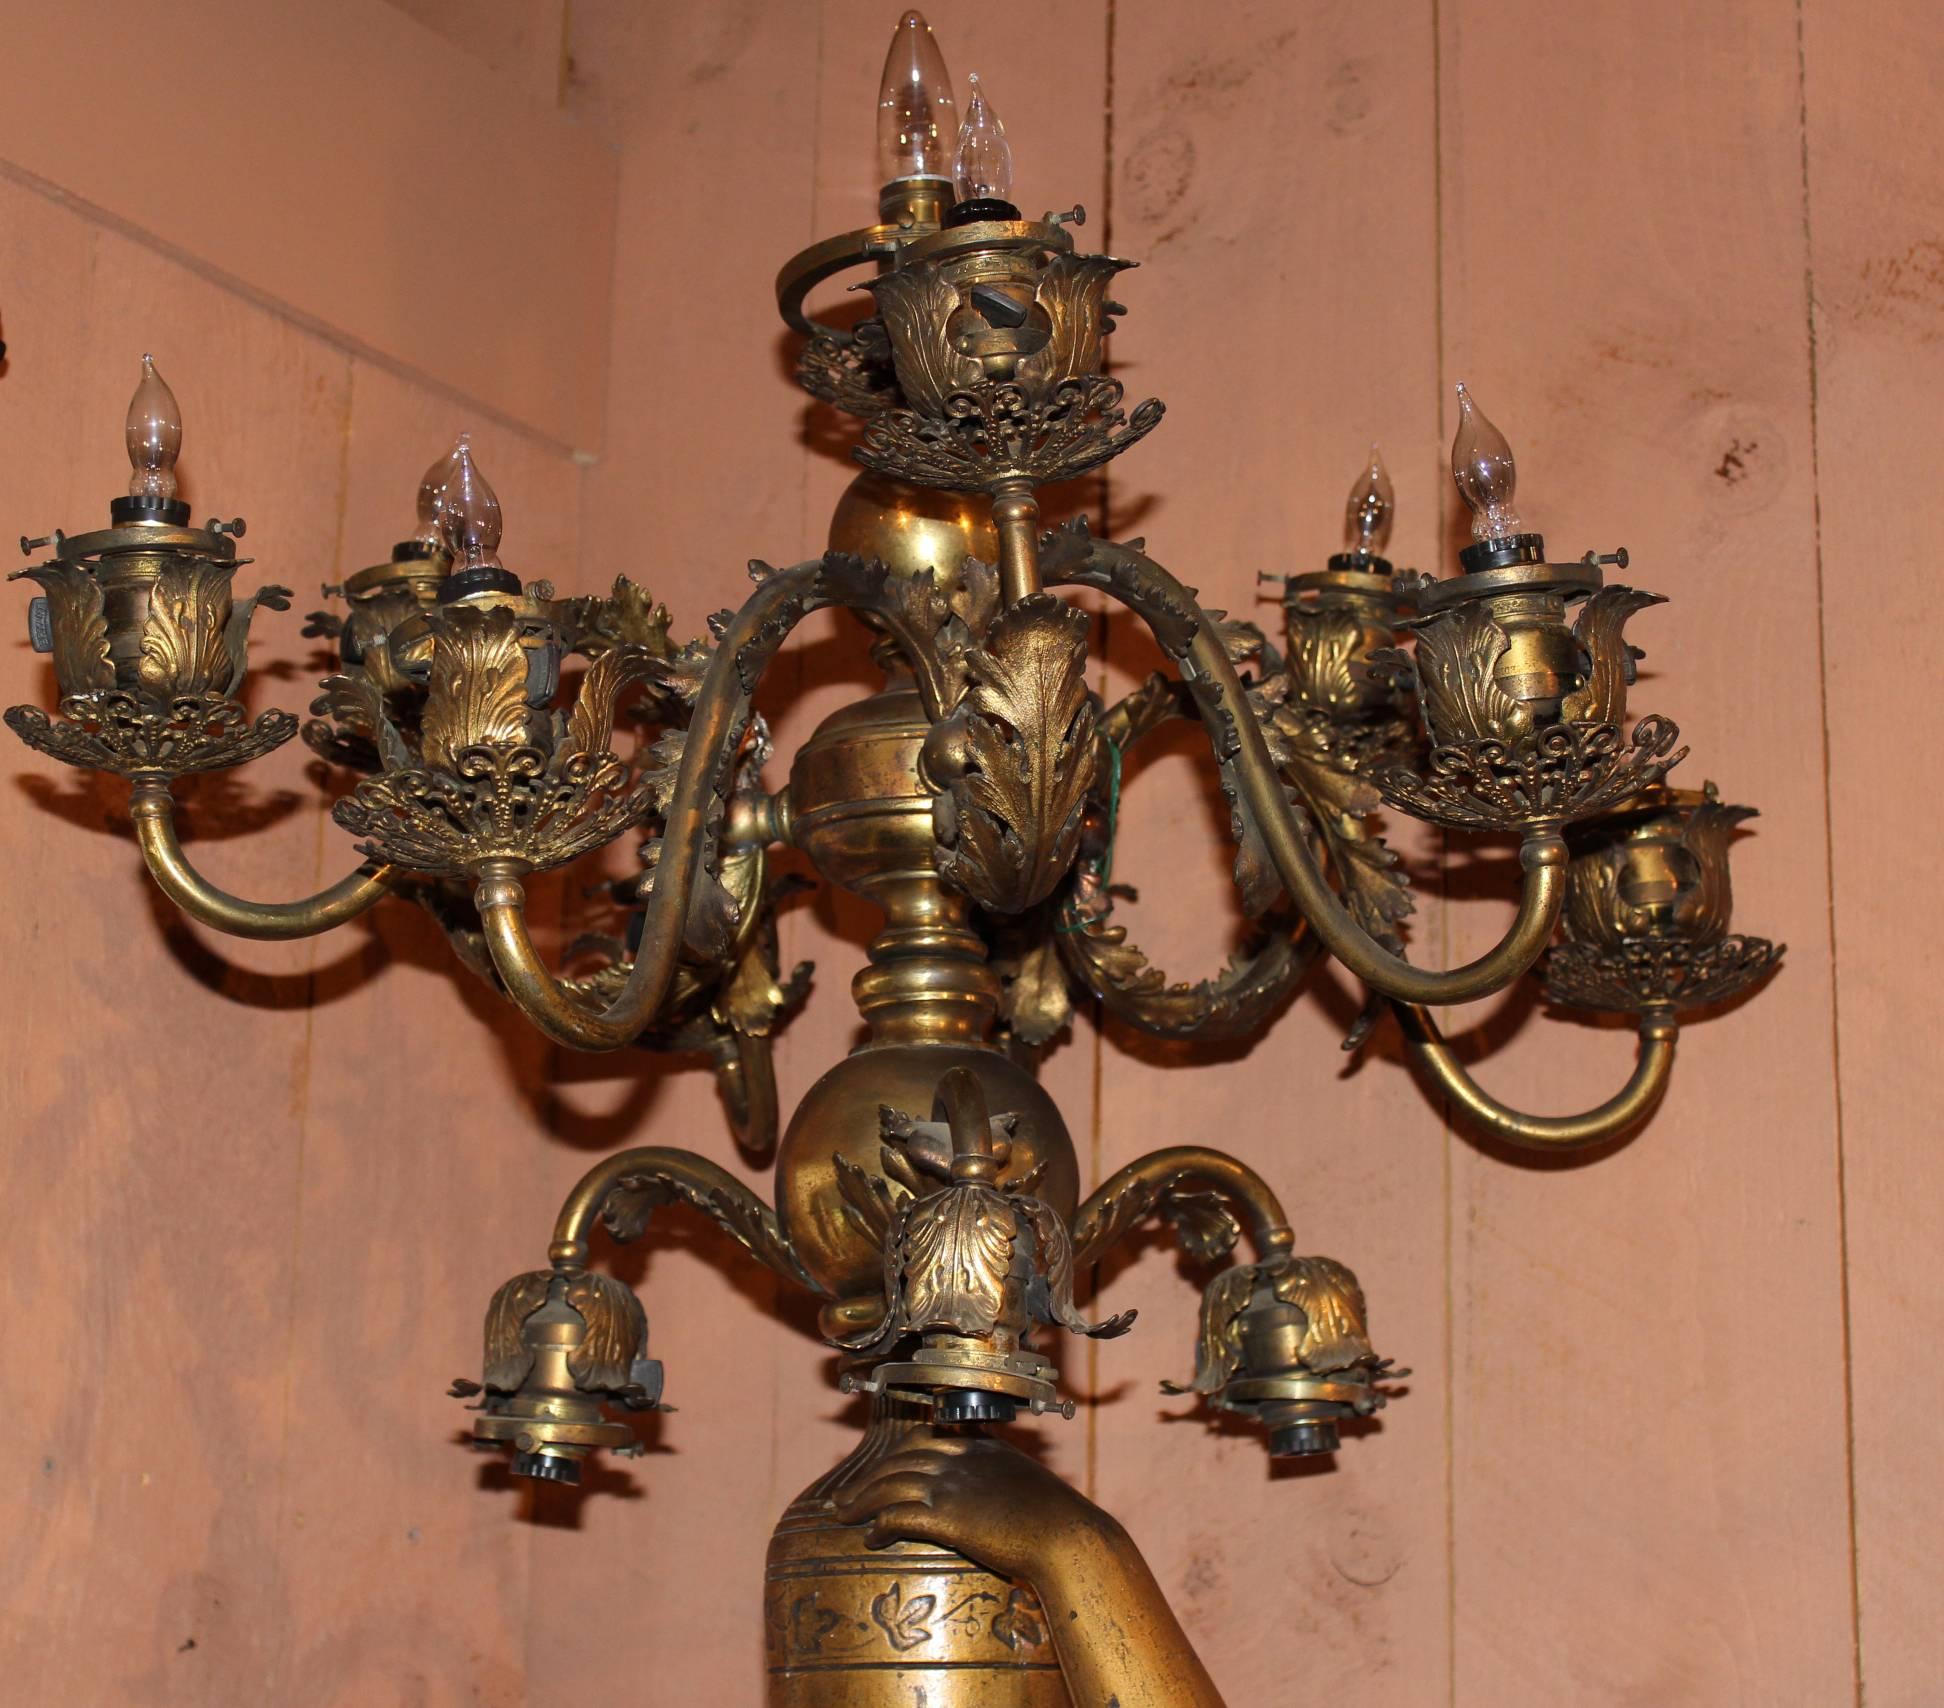 A magnificent French, Victorian patinated bronze figural floor candelabra in the form of a near lifesize robed maiden with an upstretched arm holding an urn and a thirteen branch candelabra as well as a garland of flowers. The candelabra itself has